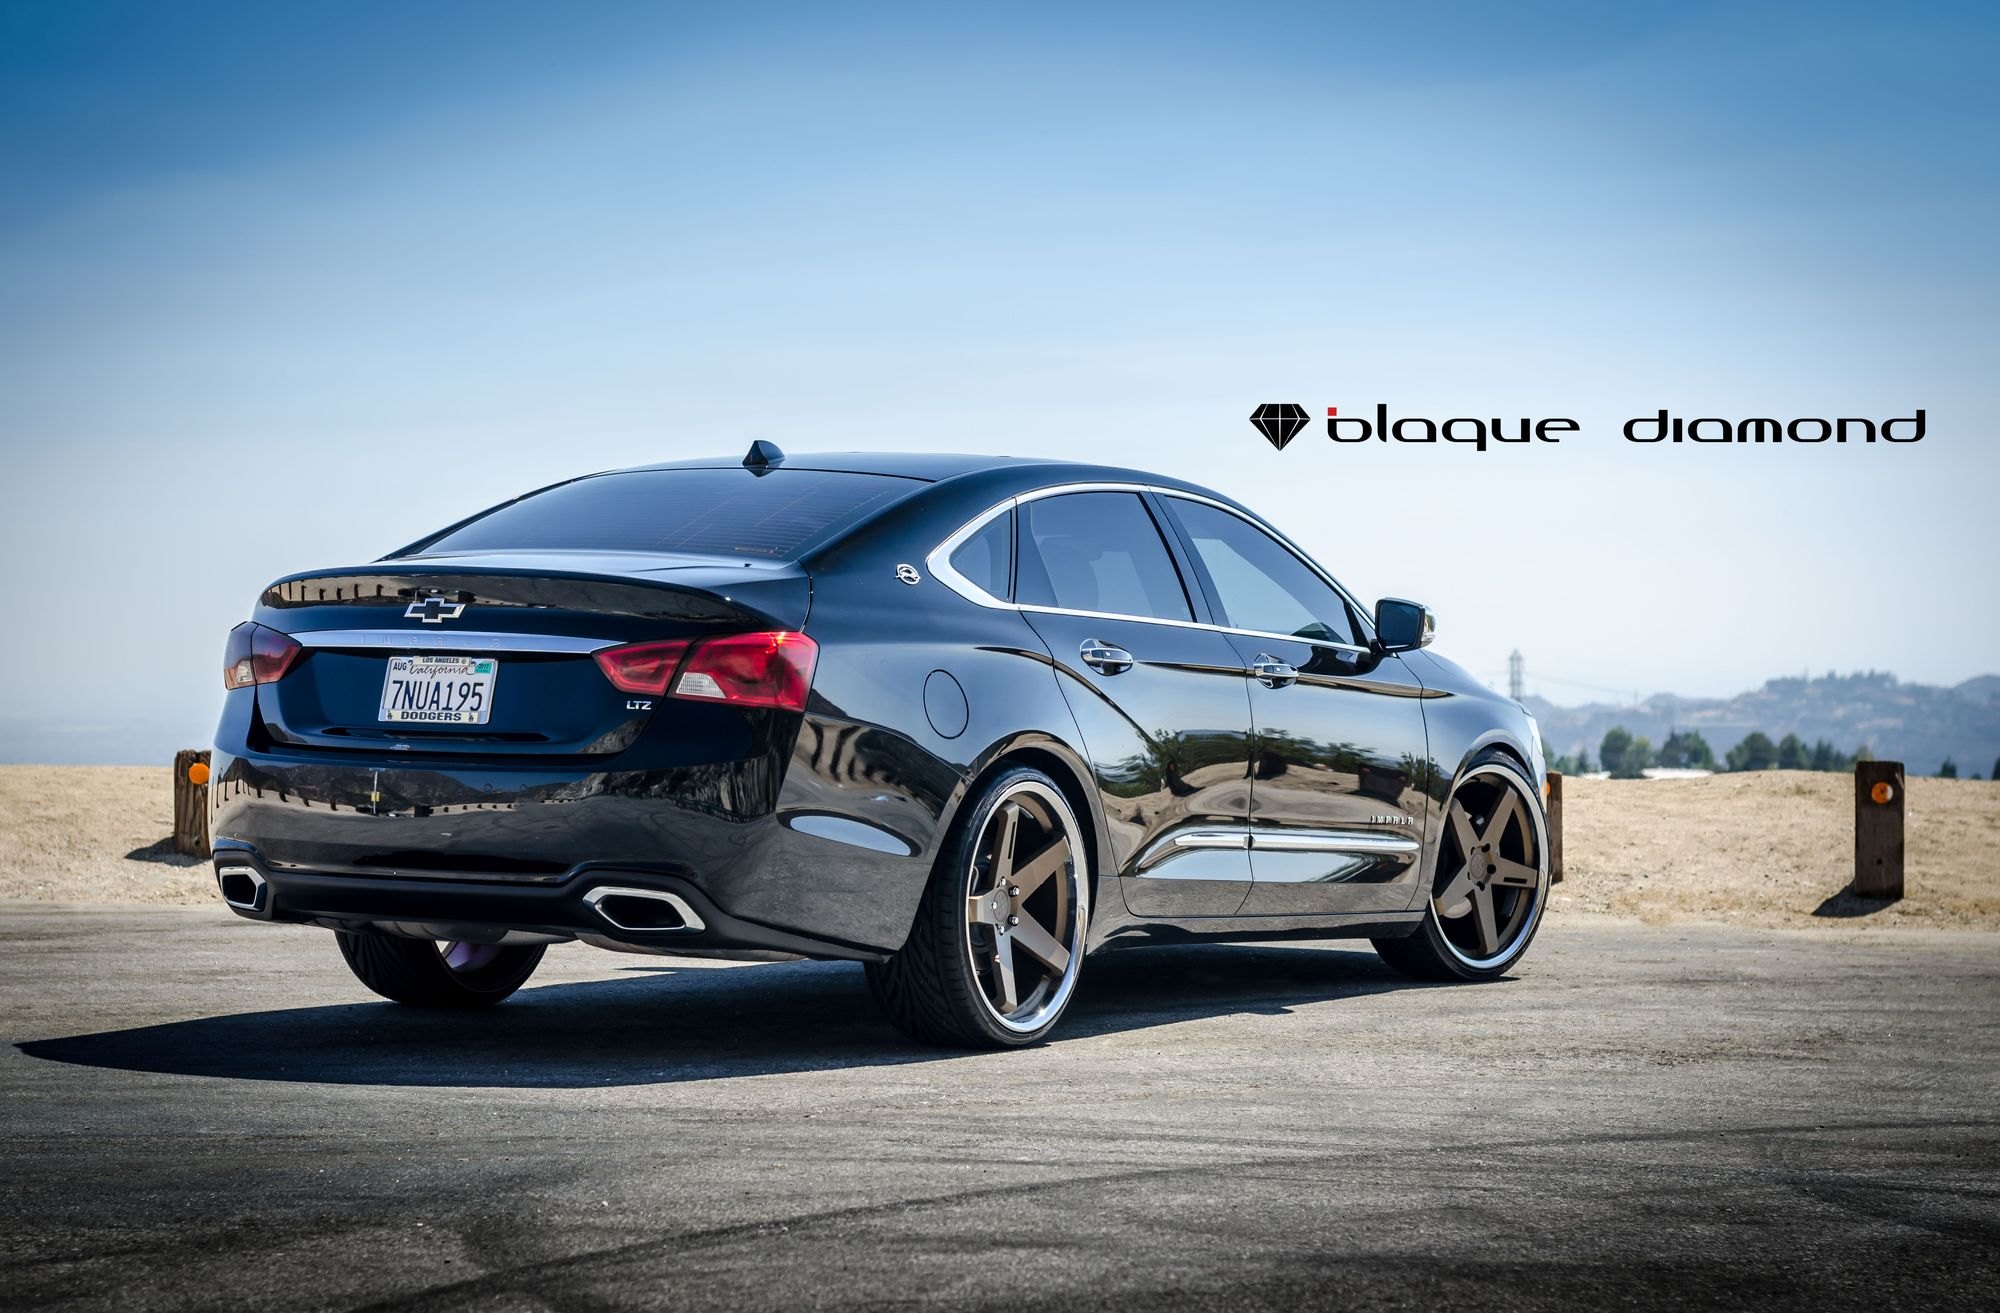 Aftermarket Rear Diffuser on Black Chevy Impala - Photo by Blaque Diamond